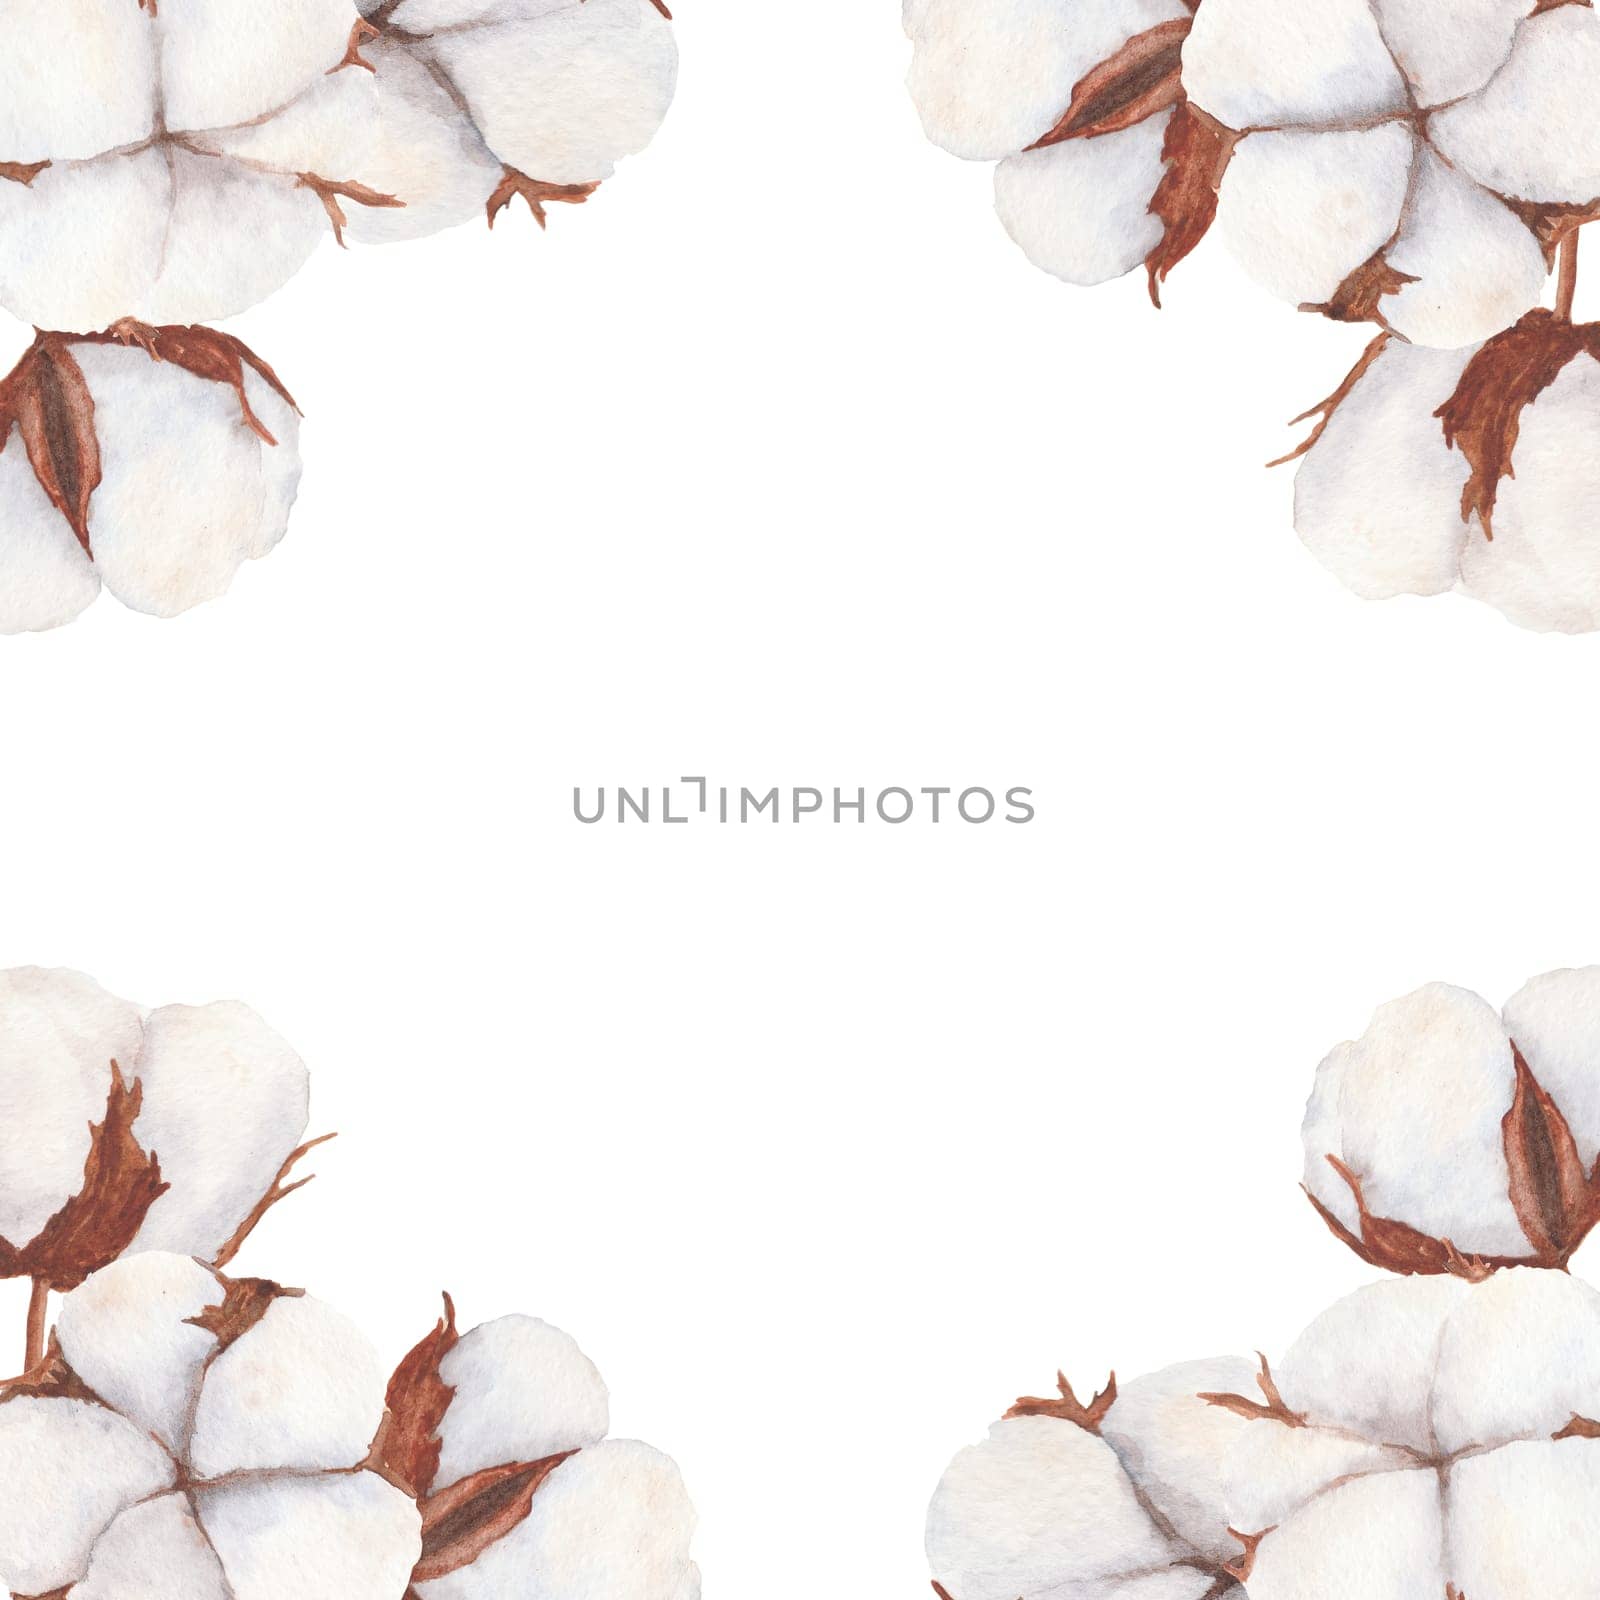 Cotton bolls illustration isolated on white background. Hand-drawn watercolor drawing. Suitable for use in the design of textiles, labels, cards, invitations